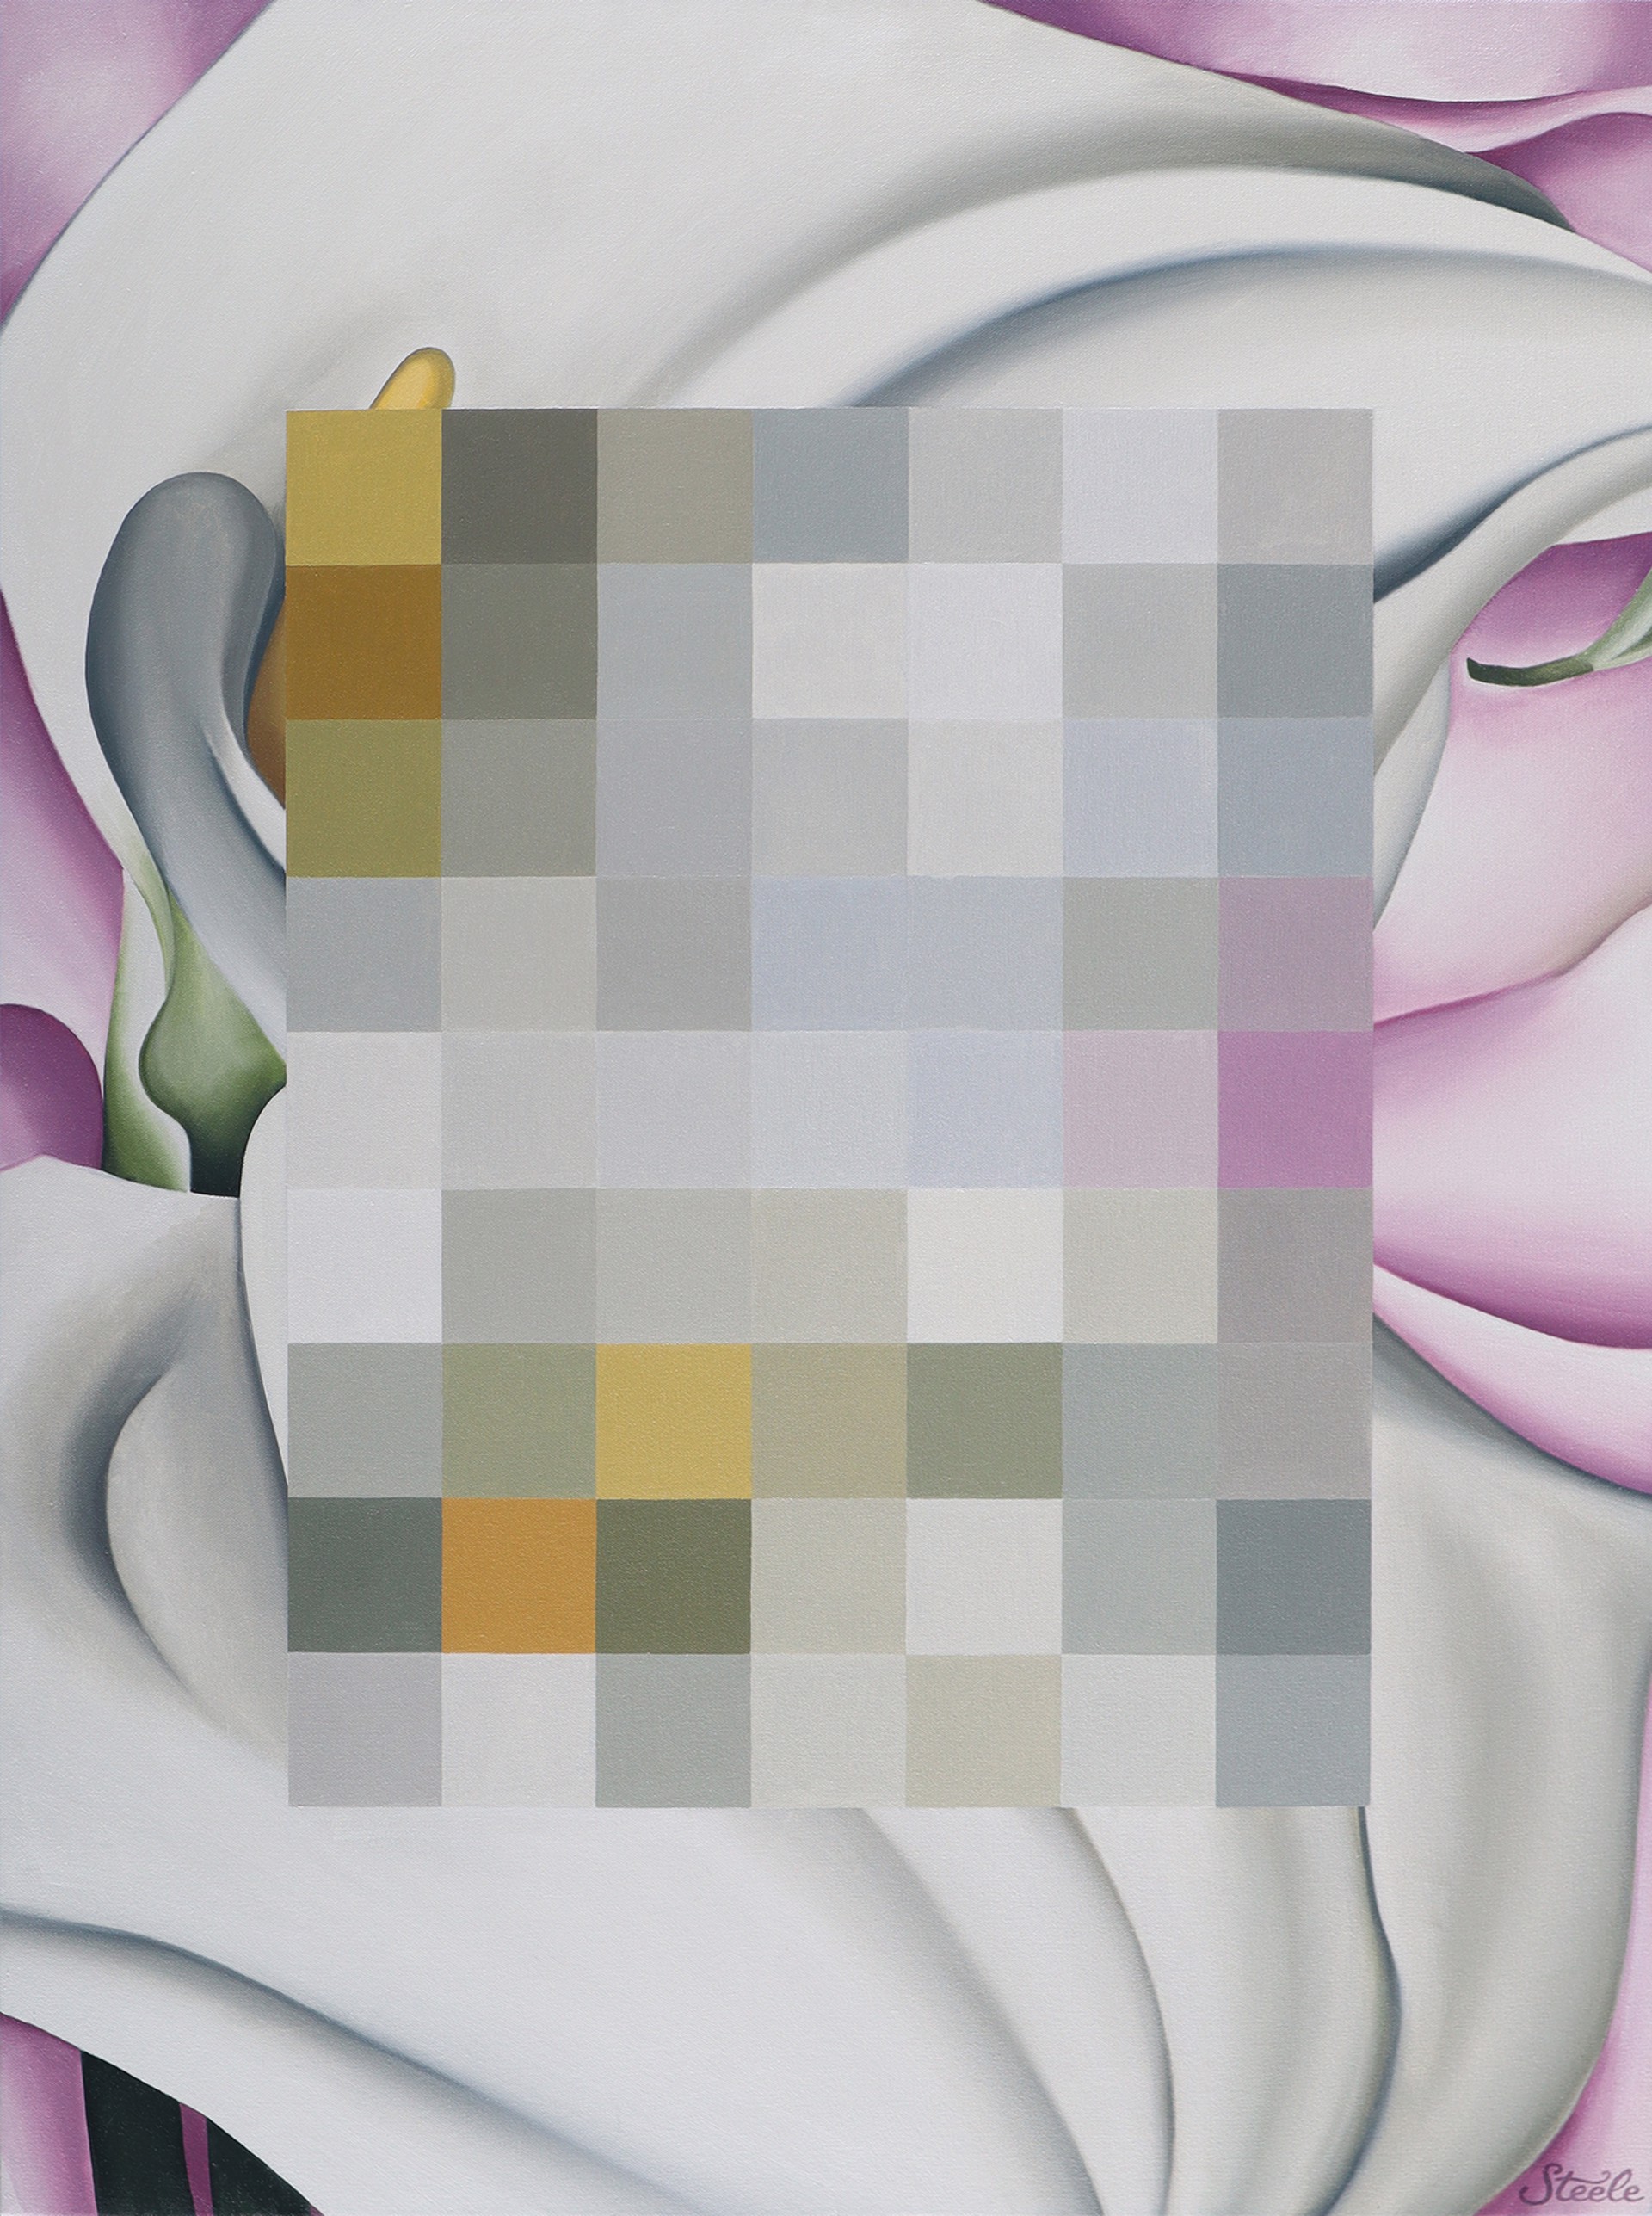 Censored:  Two Calla Lilies on Pink by Ben Steele